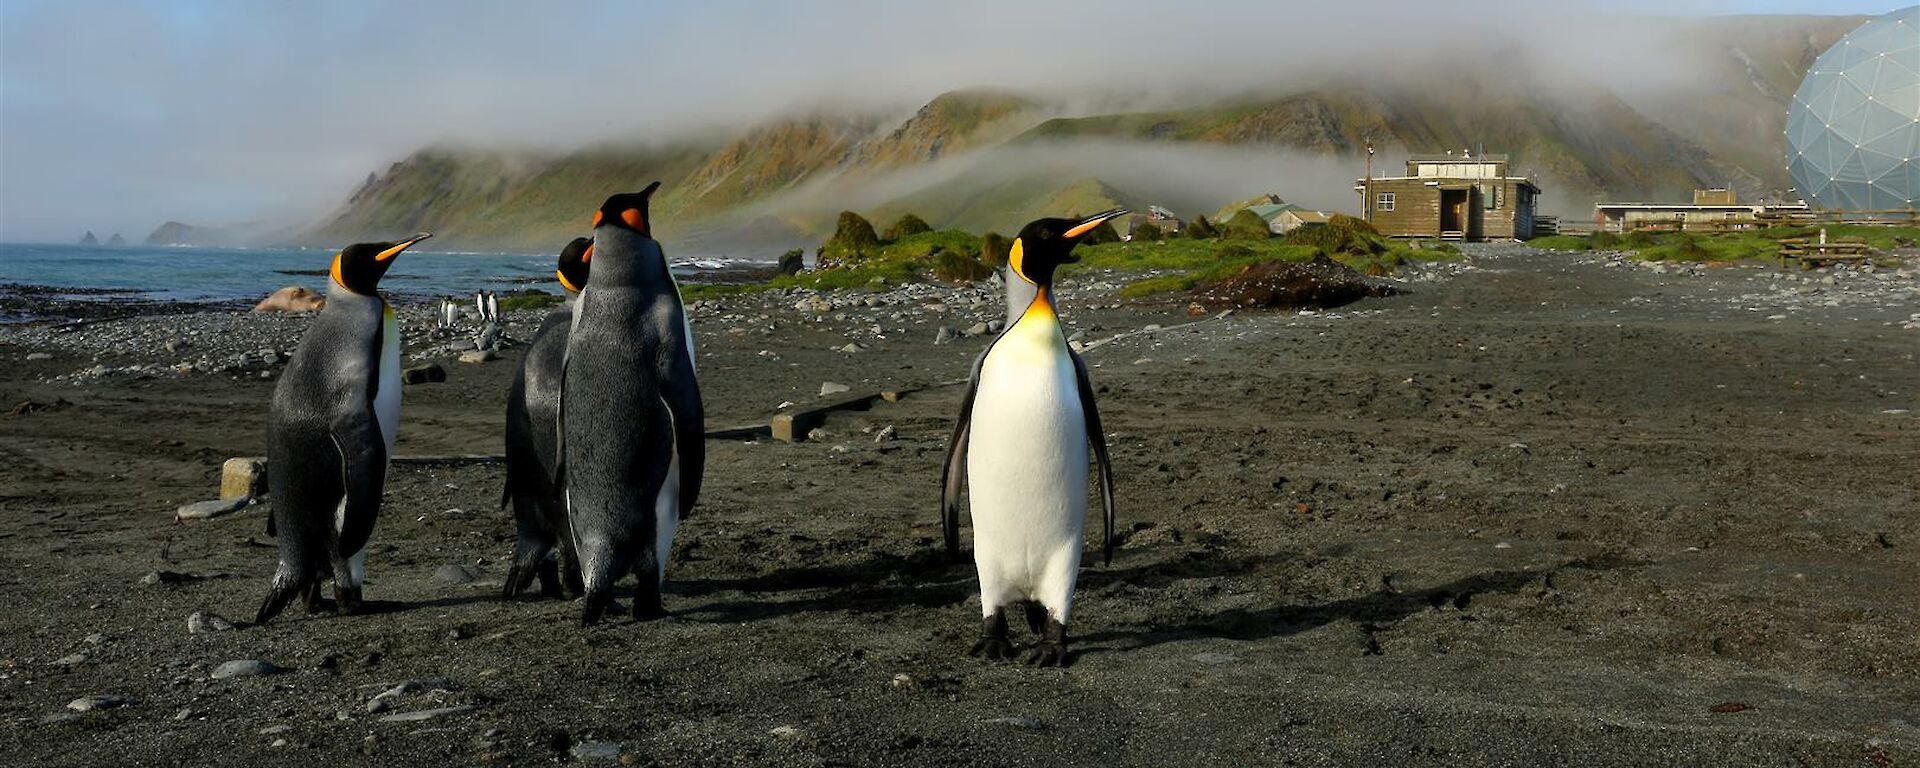 Low cloud on the plateau with King Penguins in foreground